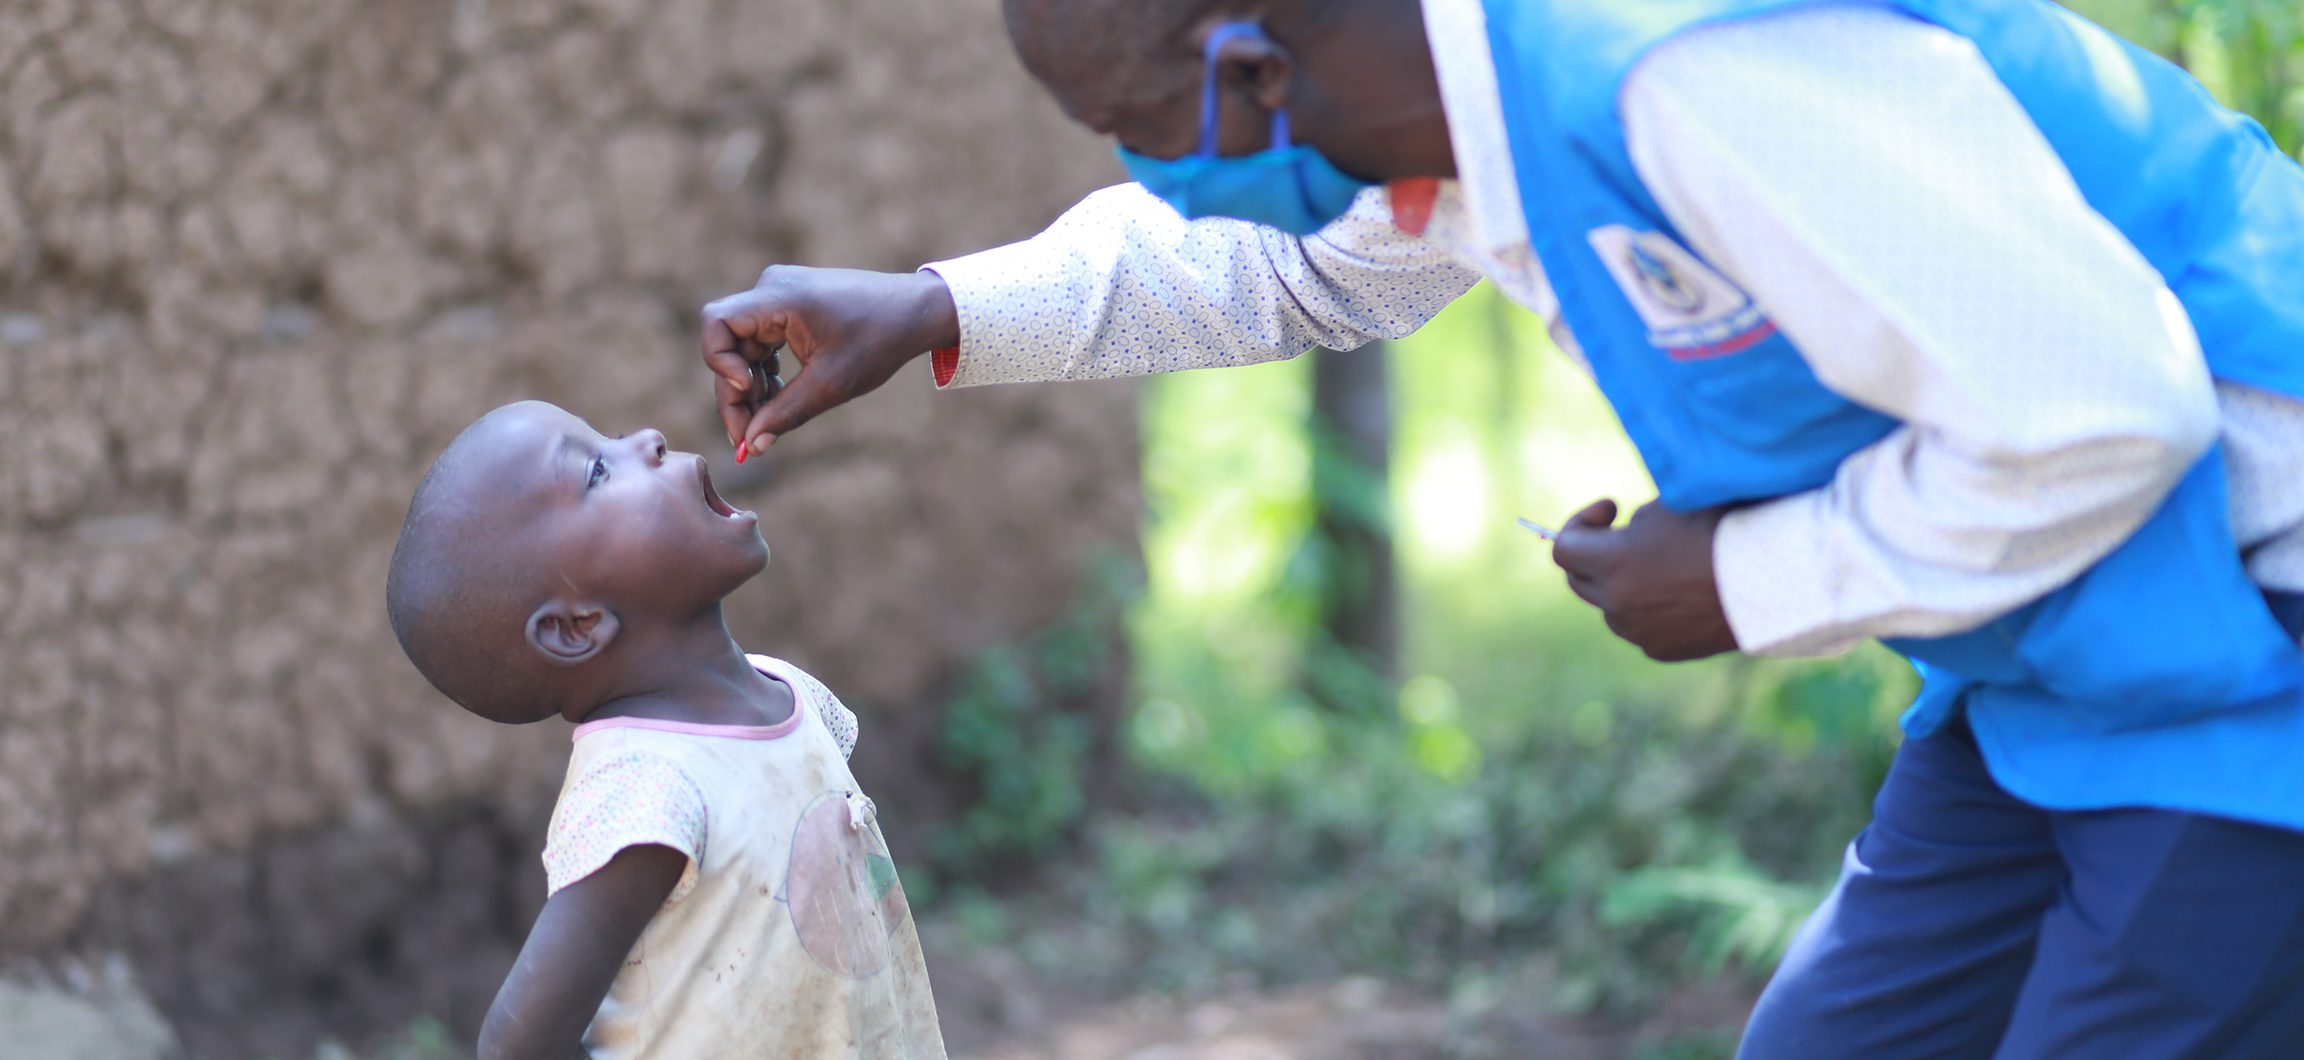 A health worker squeezes a dose of Vitamin A into a small child's mouth